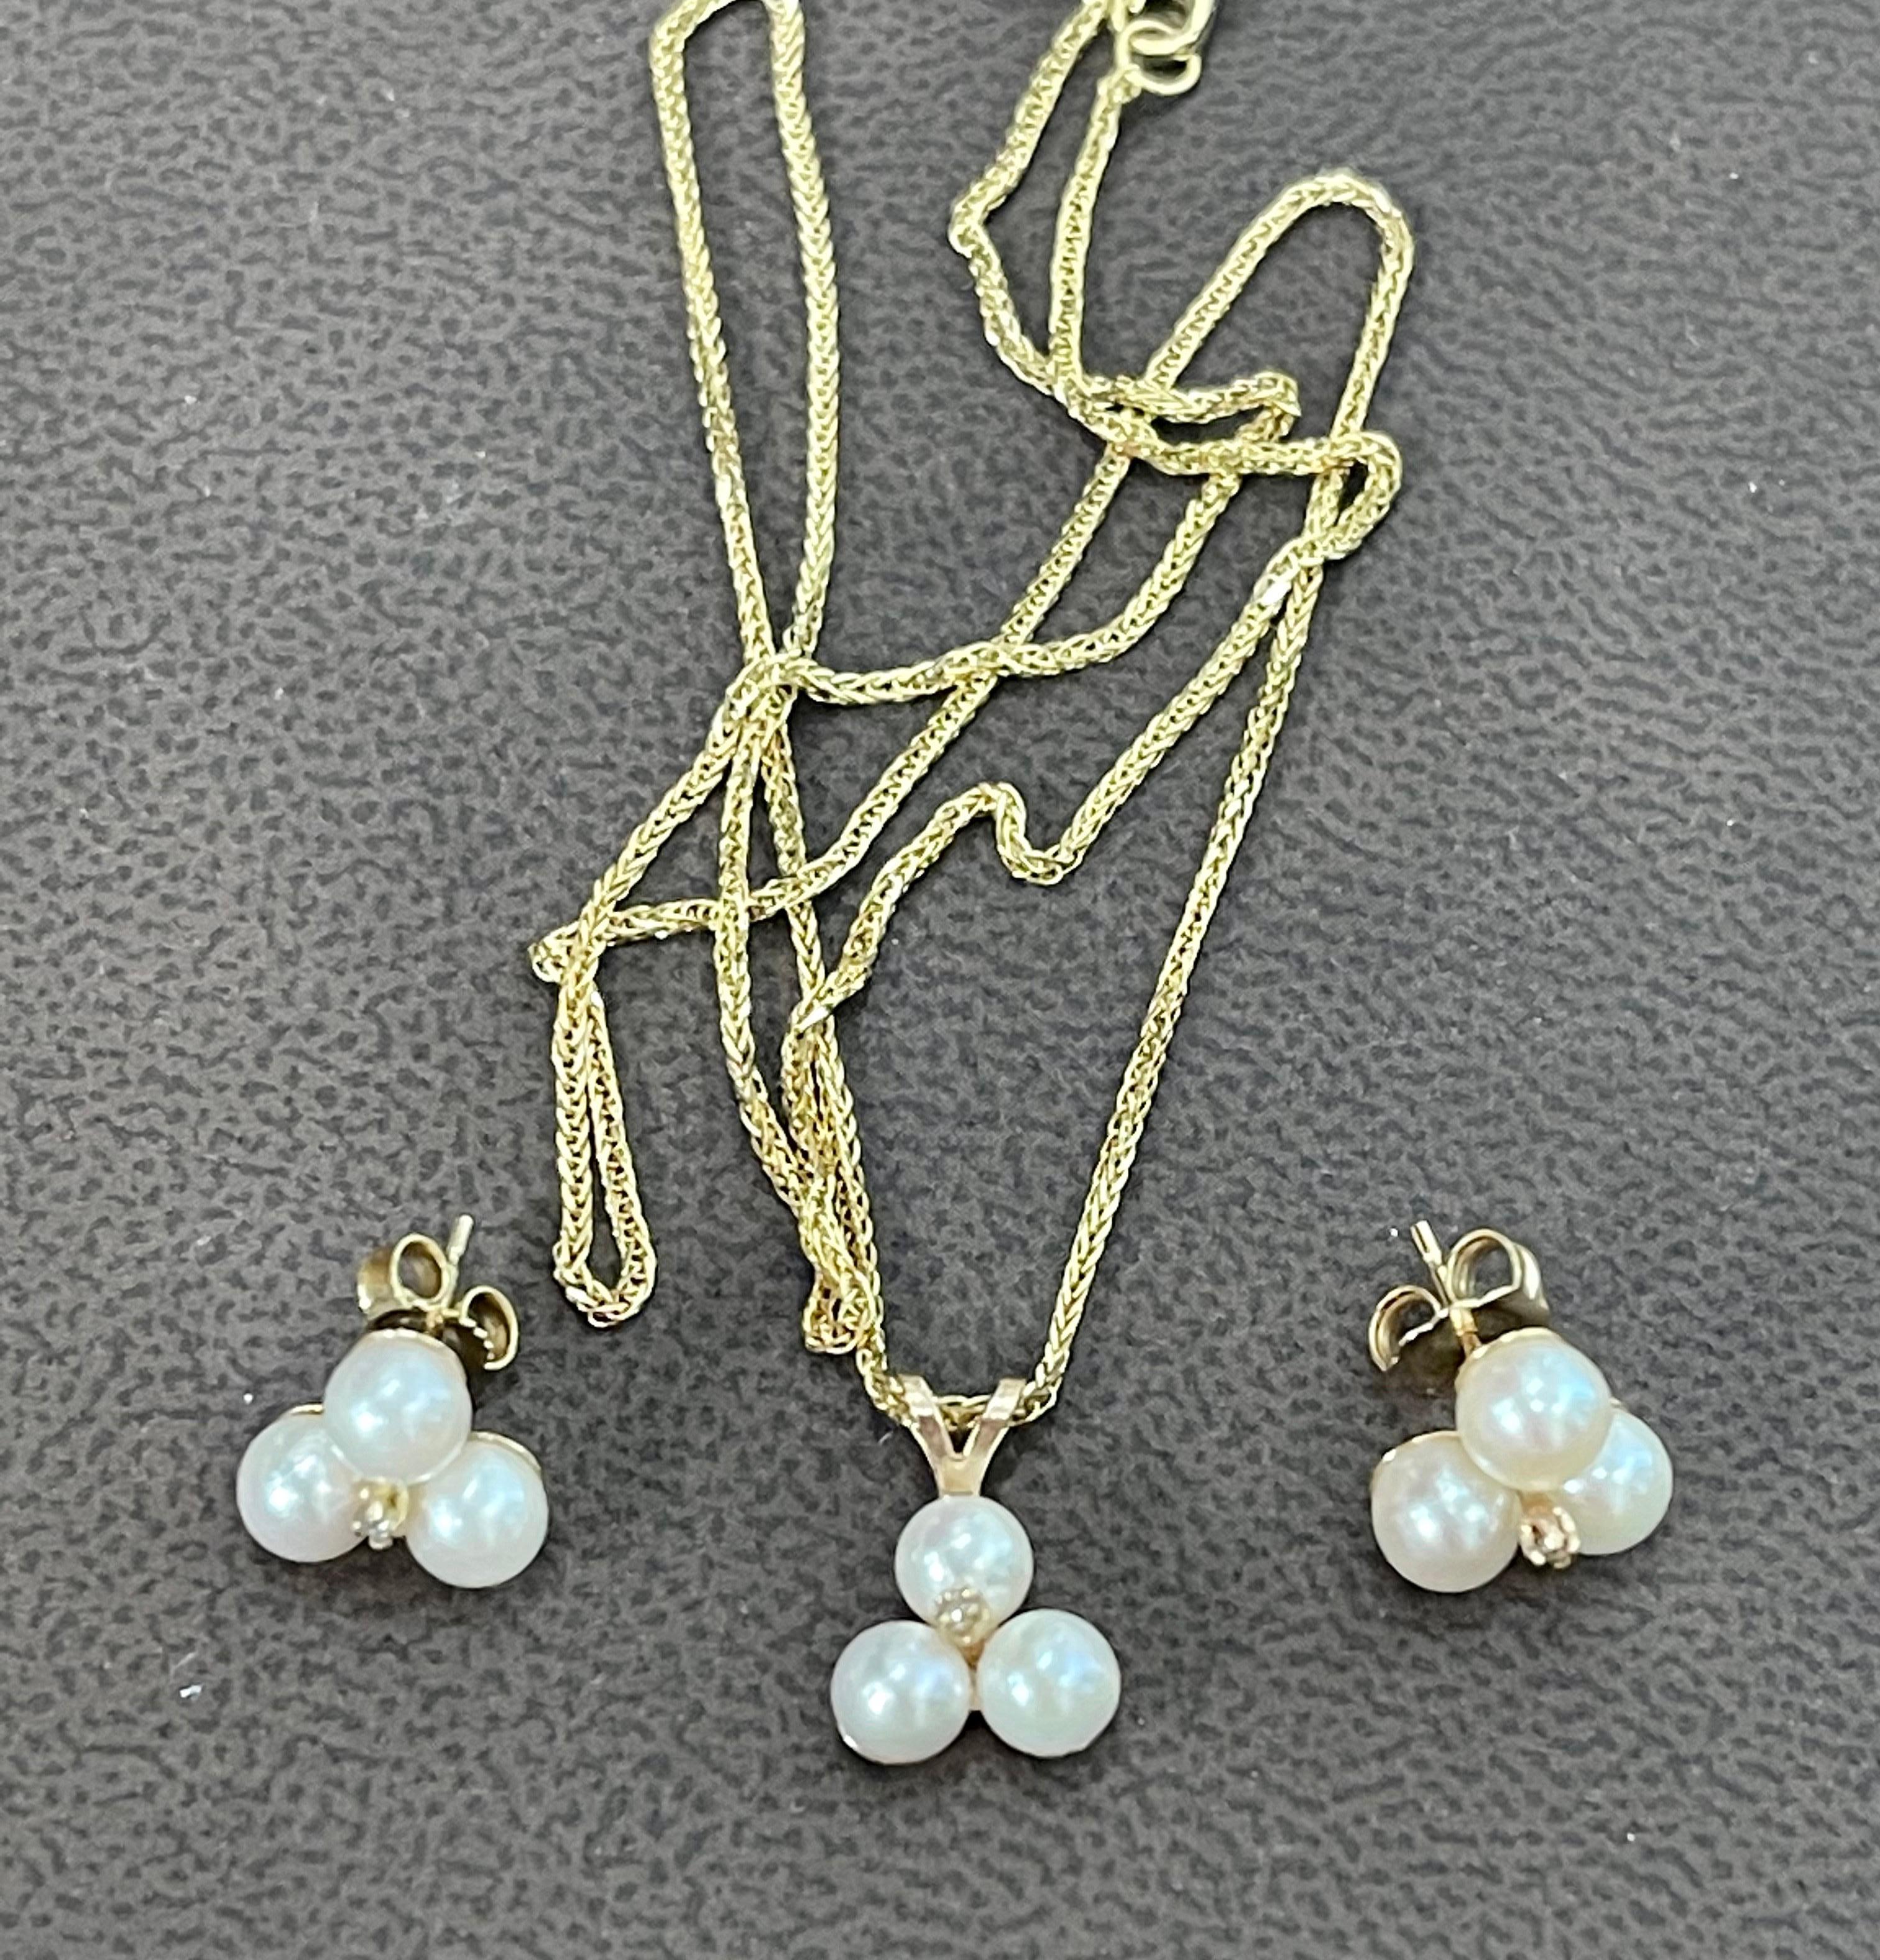 Tripod Pearl Earring with Matching Pendant & 14 Karat Yellow Gold Chain Set For Sale 4